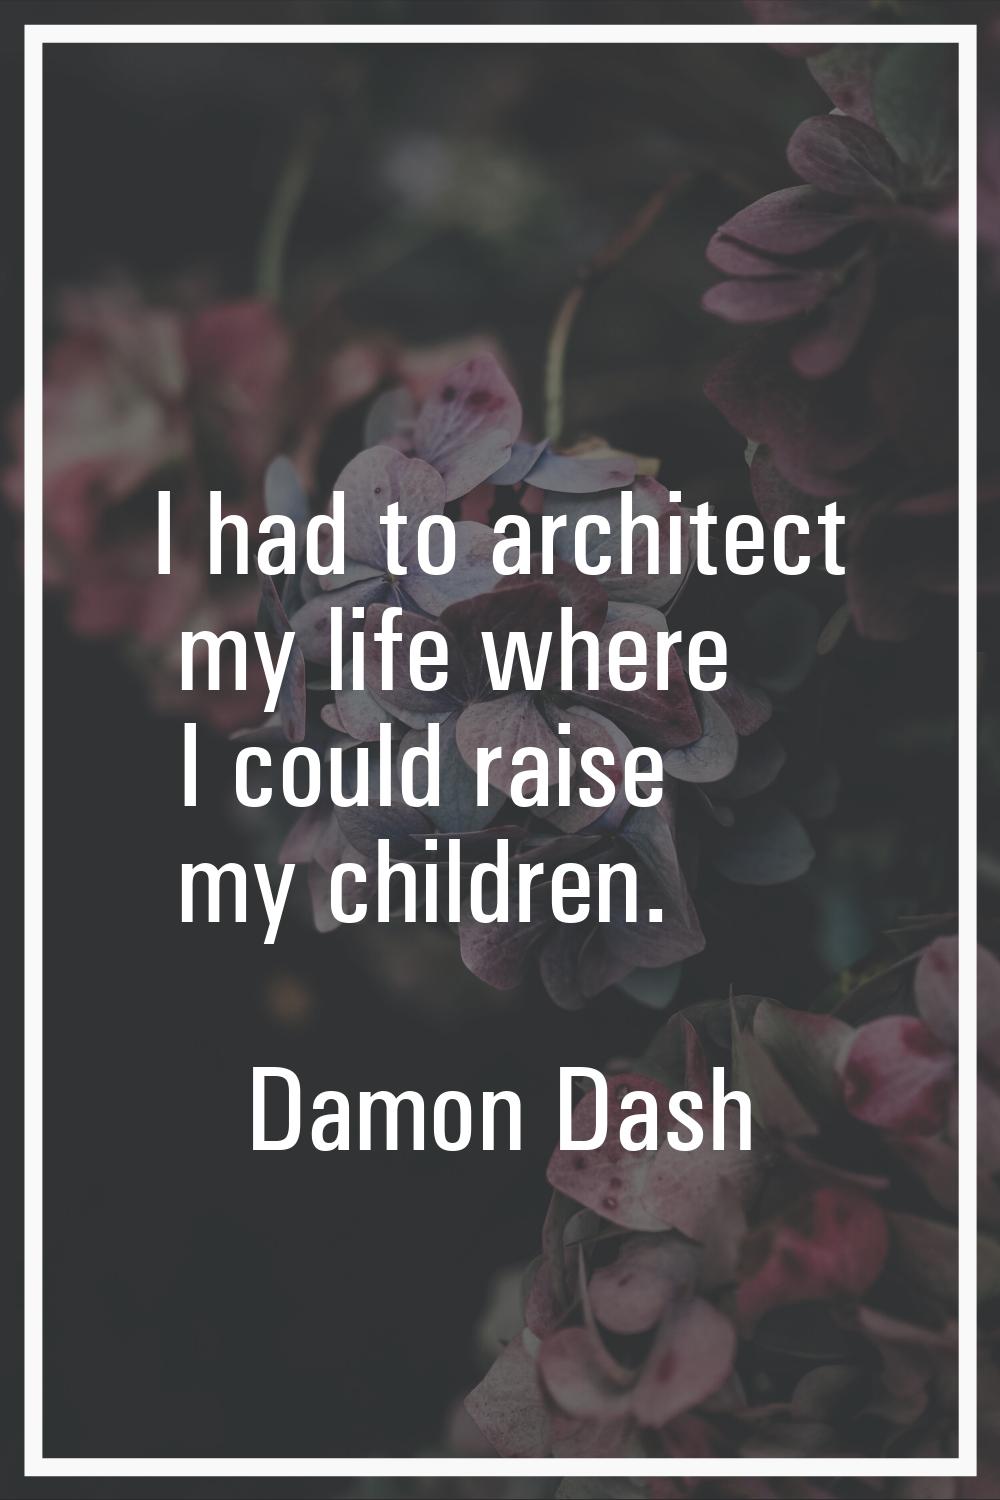 I had to architect my life where I could raise my children.